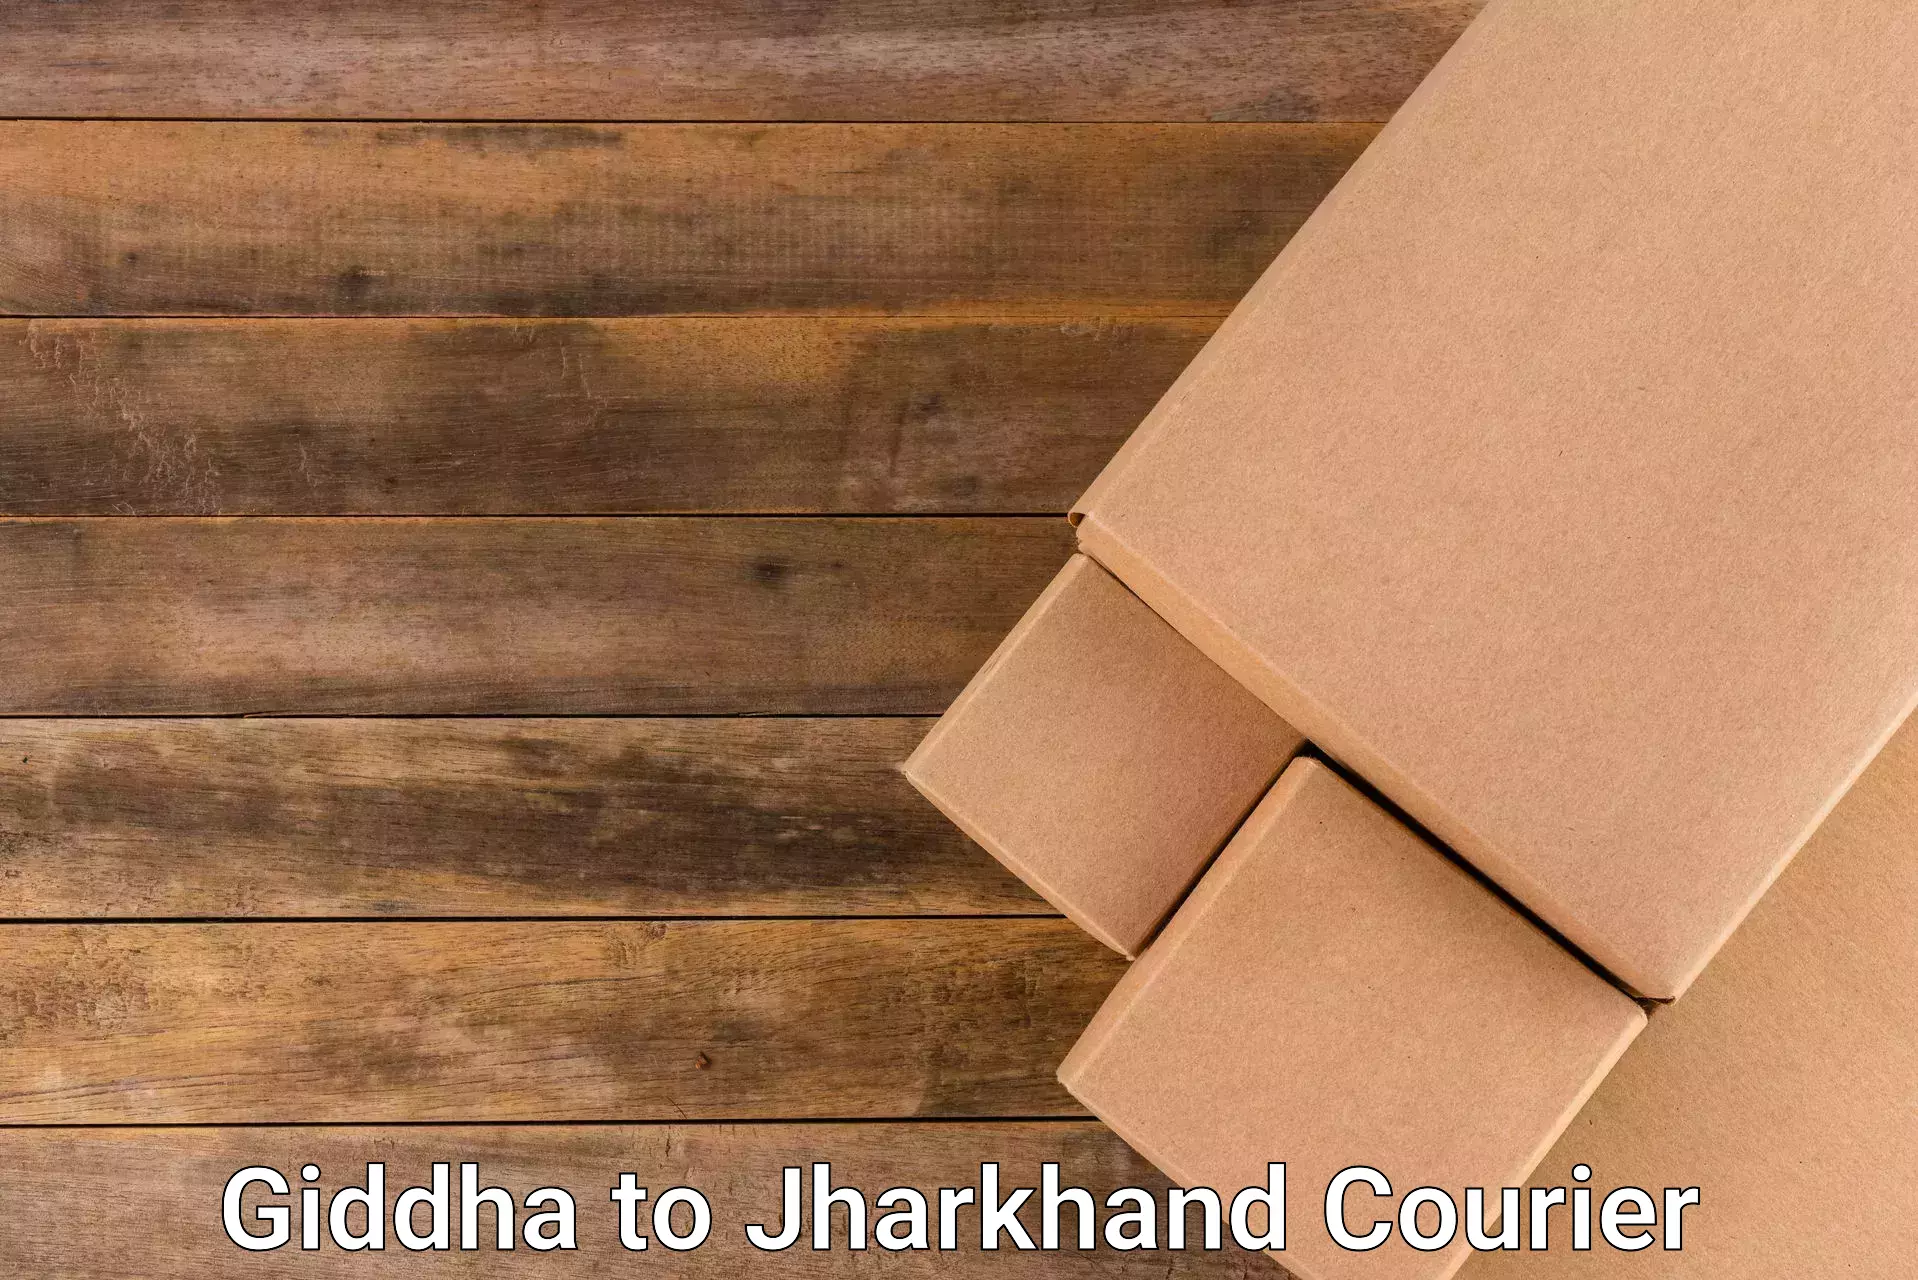 Quick booking process Giddha to Jharkhand